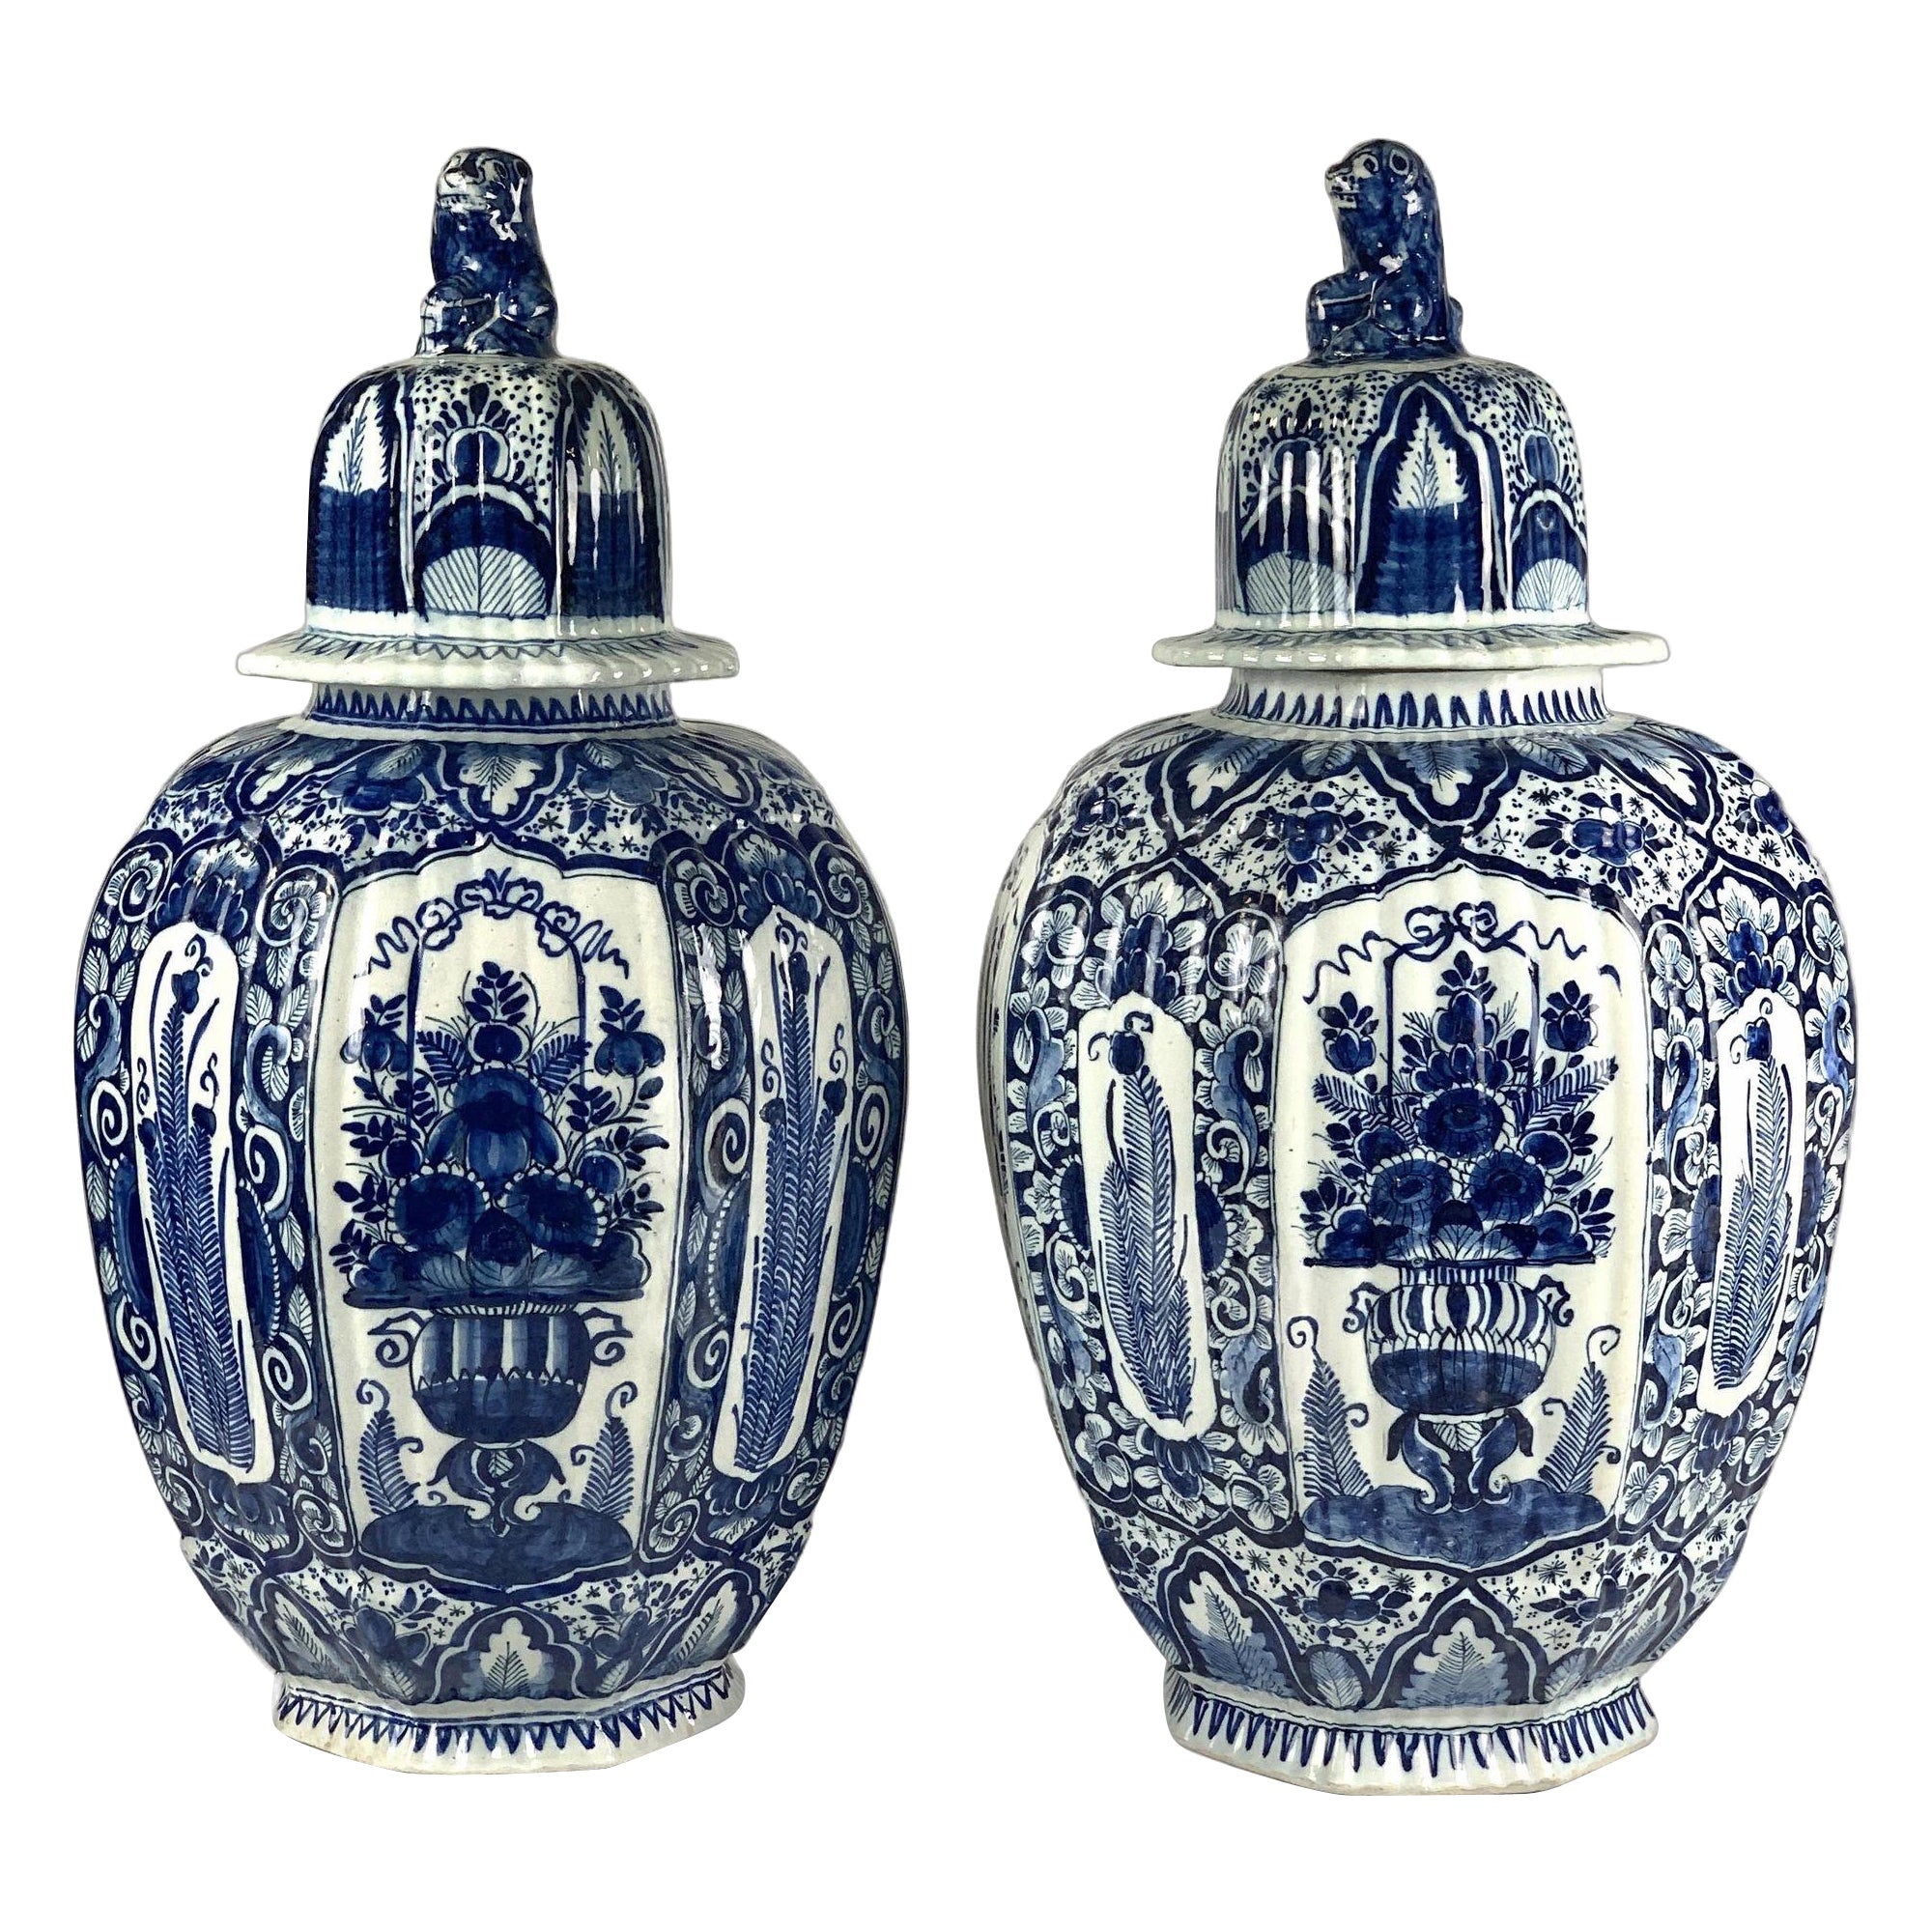 Large Blue and White Delft Jars Hand-Painted 18th Century Netherlands Circa 1780 For Sale